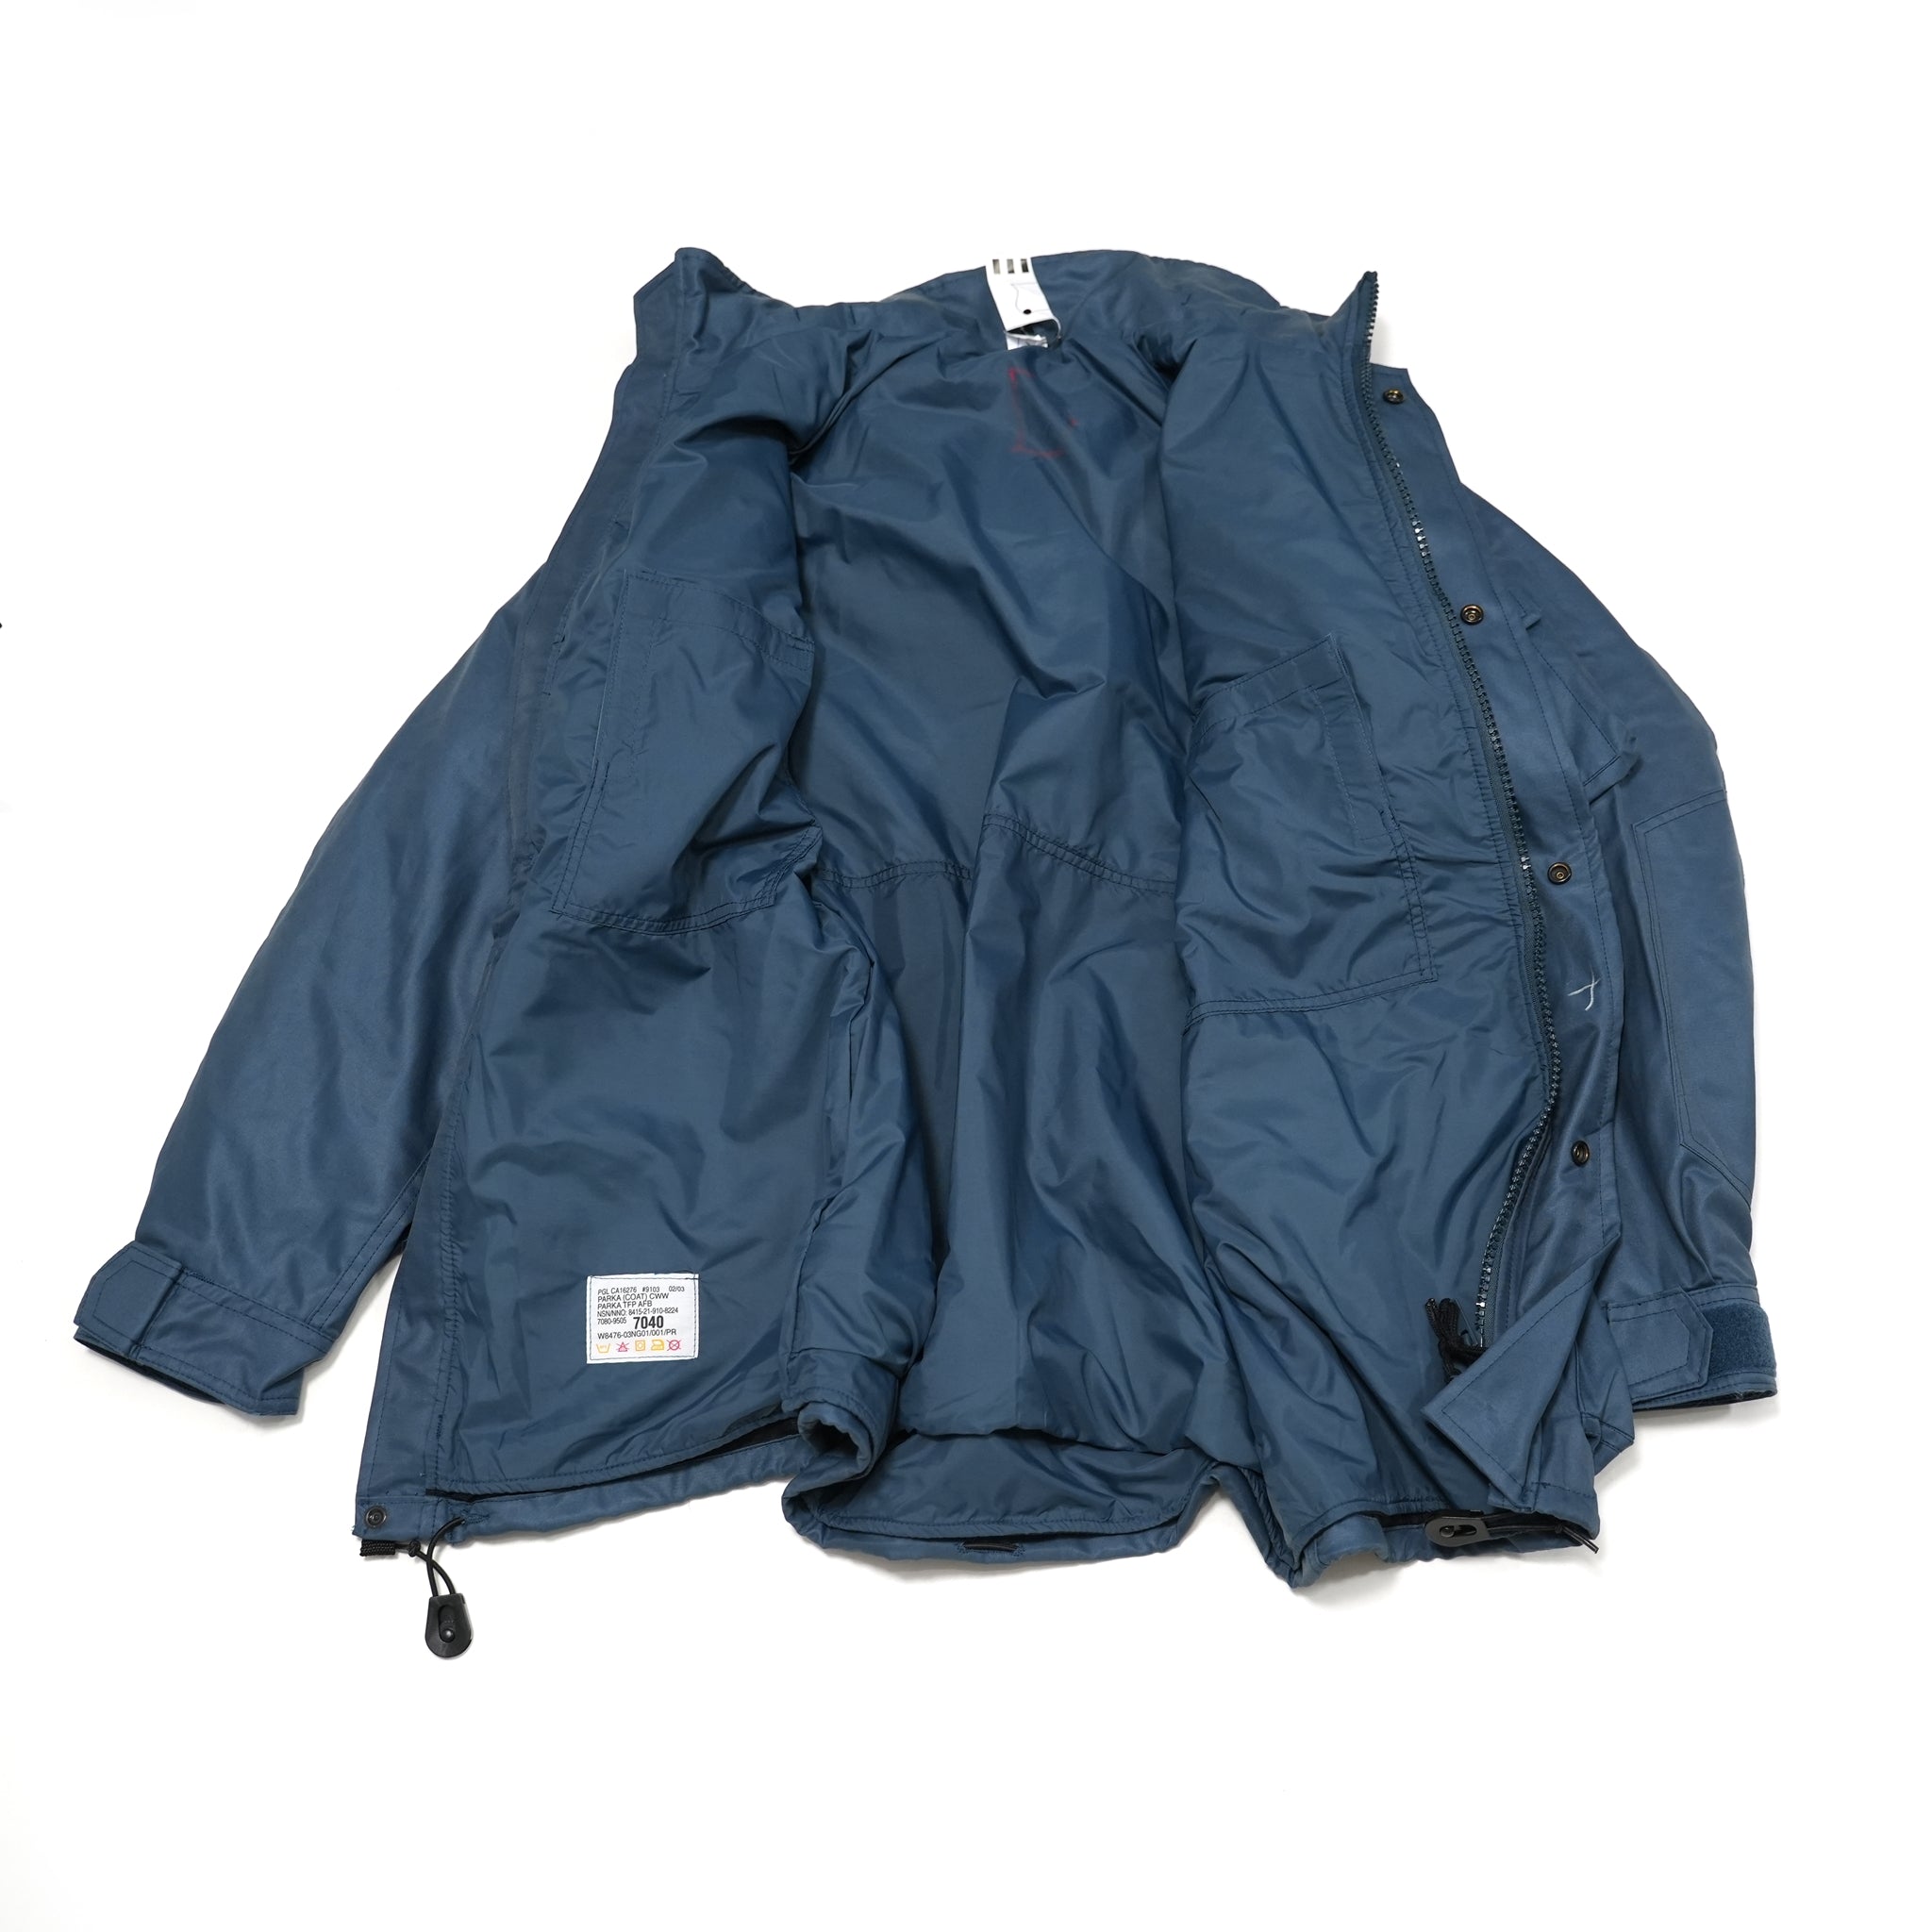 No:CO-RCAF | Name:ROYAL CANADIAN AIR FORCE コールド＆ウェットウェザーパーカ Dead Stock | Color:Blue 【 Dead Stock 】【カナダ軍】